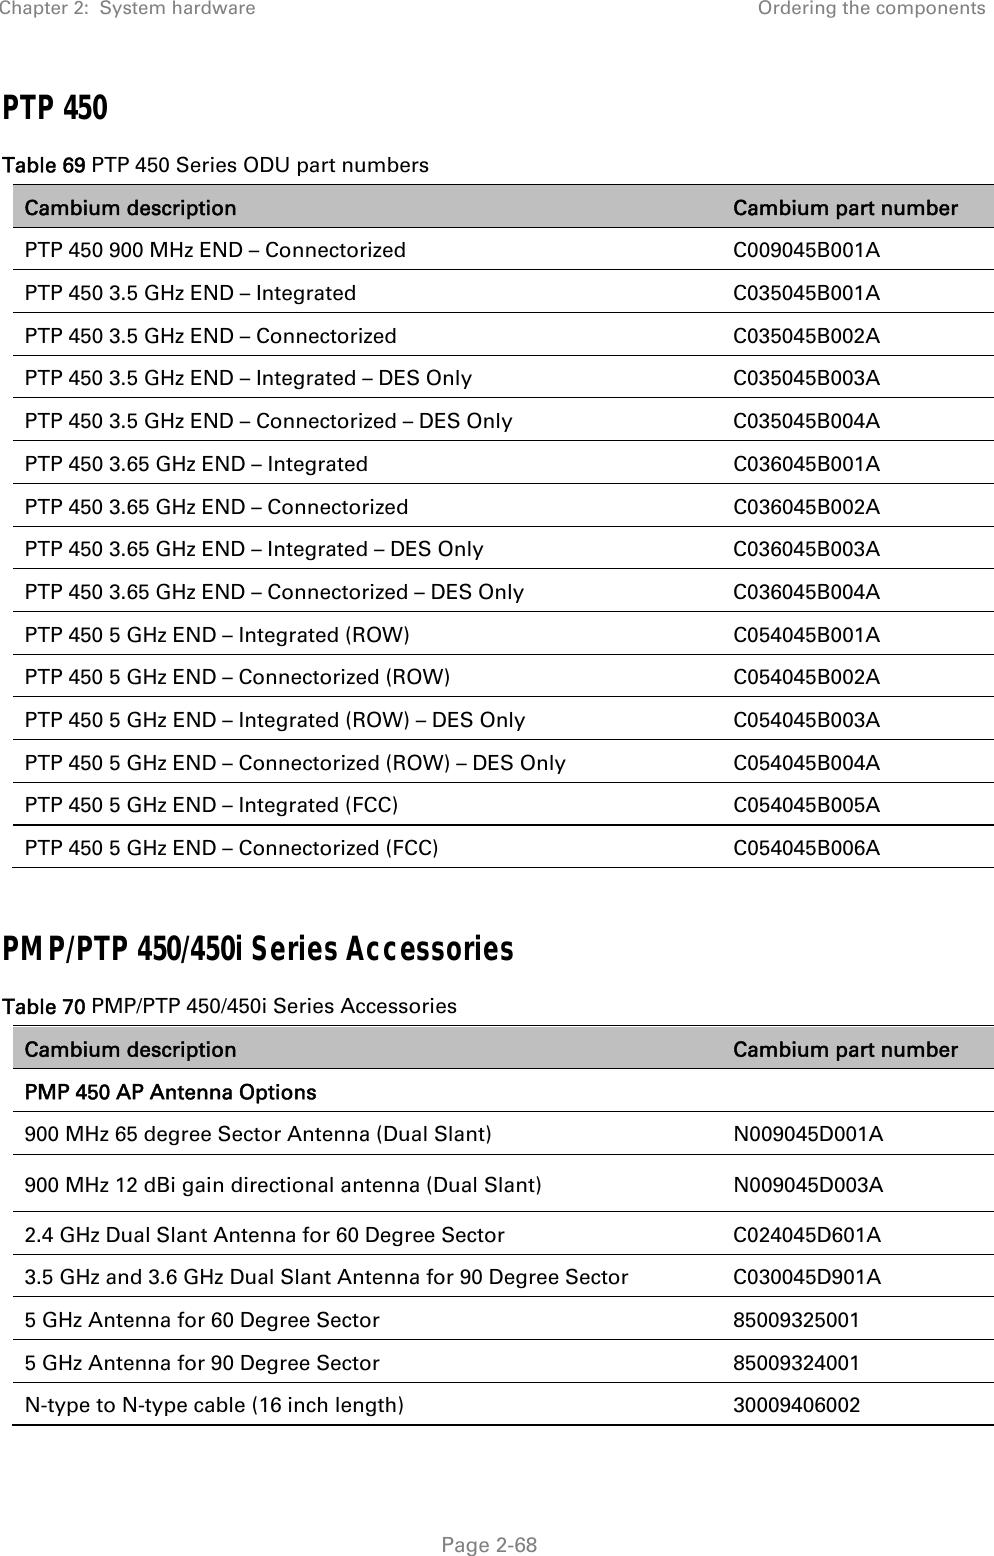 Chapter 2:  System hardware  Ordering the components   Page 2-68 PTP 450 Table 69 PTP 450 Series ODU part numbers Cambium description  Cambium part number PTP 450 900 MHz END – Connectorized  C009045B001A PTP 450 3.5 GHz END – Integrated  C035045B001A PTP 450 3.5 GHz END – Connectorized  C035045B002A PTP 450 3.5 GHz END – Integrated – DES Only  C035045B003A PTP 450 3.5 GHz END – Connectorized – DES Only  C035045B004A PTP 450 3.65 GHz END – Integrated  C036045B001A PTP 450 3.65 GHz END – Connectorized  C036045B002A PTP 450 3.65 GHz END – Integrated – DES Only  C036045B003A PTP 450 3.65 GHz END – Connectorized – DES Only  C036045B004A PTP 450 5 GHz END – Integrated (ROW)  C054045B001A PTP 450 5 GHz END – Connectorized (ROW)  C054045B002A PTP 450 5 GHz END – Integrated (ROW) – DES Only  C054045B003A PTP 450 5 GHz END – Connectorized (ROW) – DES Only  C054045B004A PTP 450 5 GHz END – Integrated (FCC)  C054045B005A PTP 450 5 GHz END – Connectorized (FCC)  C054045B006A  PMP/PTP 450/450i Series Accessories Table 70 PMP/PTP 450/450i Series Accessories Cambium description  Cambium part number PMP 450 AP Antenna Options   900 MHz 65 degree Sector Antenna (Dual Slant) N009045D001A 900 MHz 12 dBi gain directional antenna (Dual Slant) N009045D003A 2.4 GHz Dual Slant Antenna for 60 Degree Sector  C024045D601A 3.5 GHz and 3.6 GHz Dual Slant Antenna for 90 Degree Sector  C030045D901A 5 GHz Antenna for 60 Degree Sector  85009325001 5 GHz Antenna for 90 Degree Sector  85009324001 N-type to N-type cable (16 inch length)  30009406002 